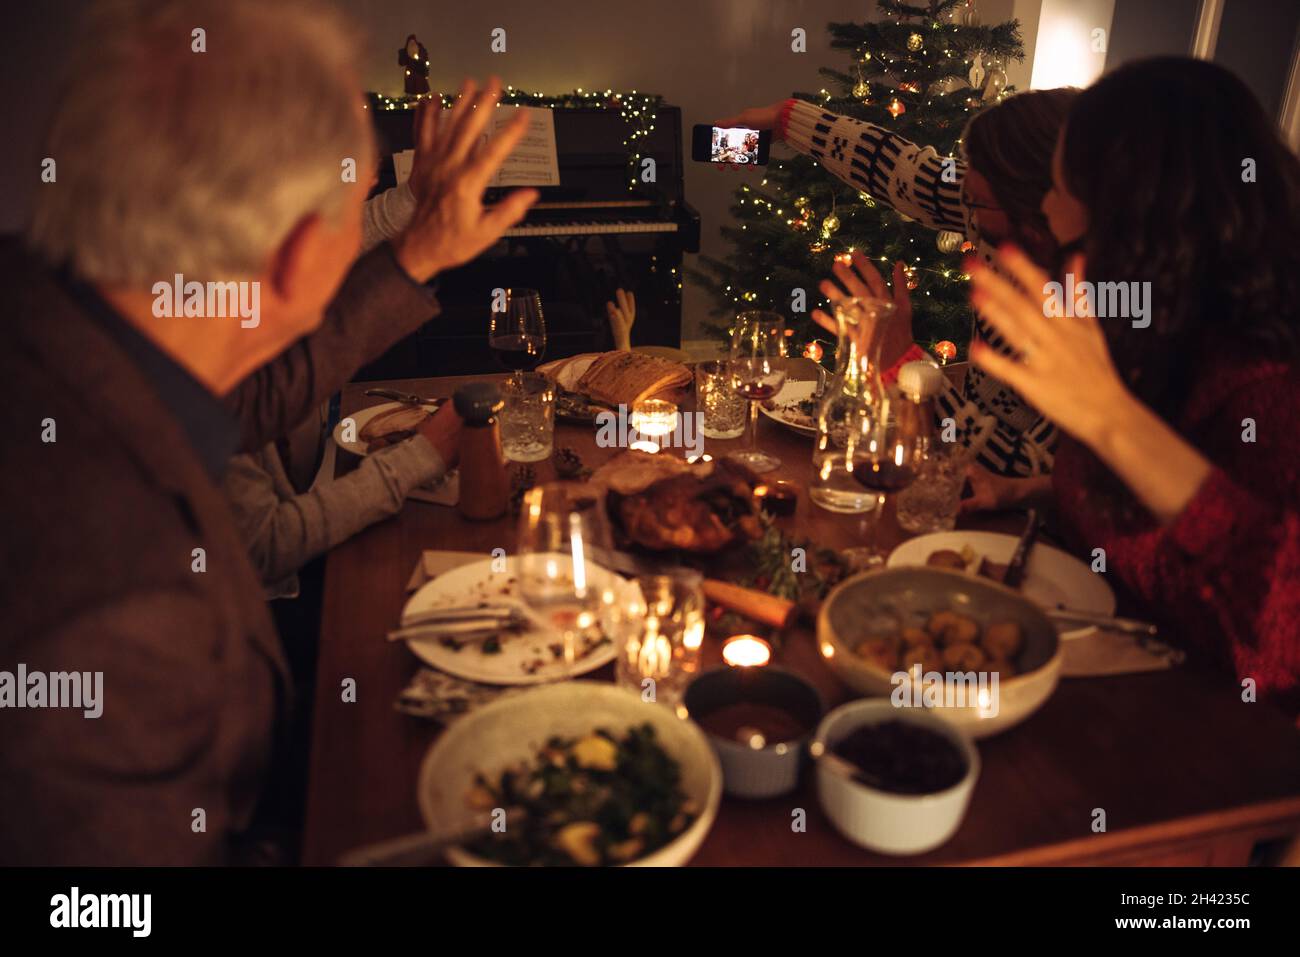 Man taking selfie with family on christmas eve dinner. Family taking selfie during Christmas dinner. Stock Photo